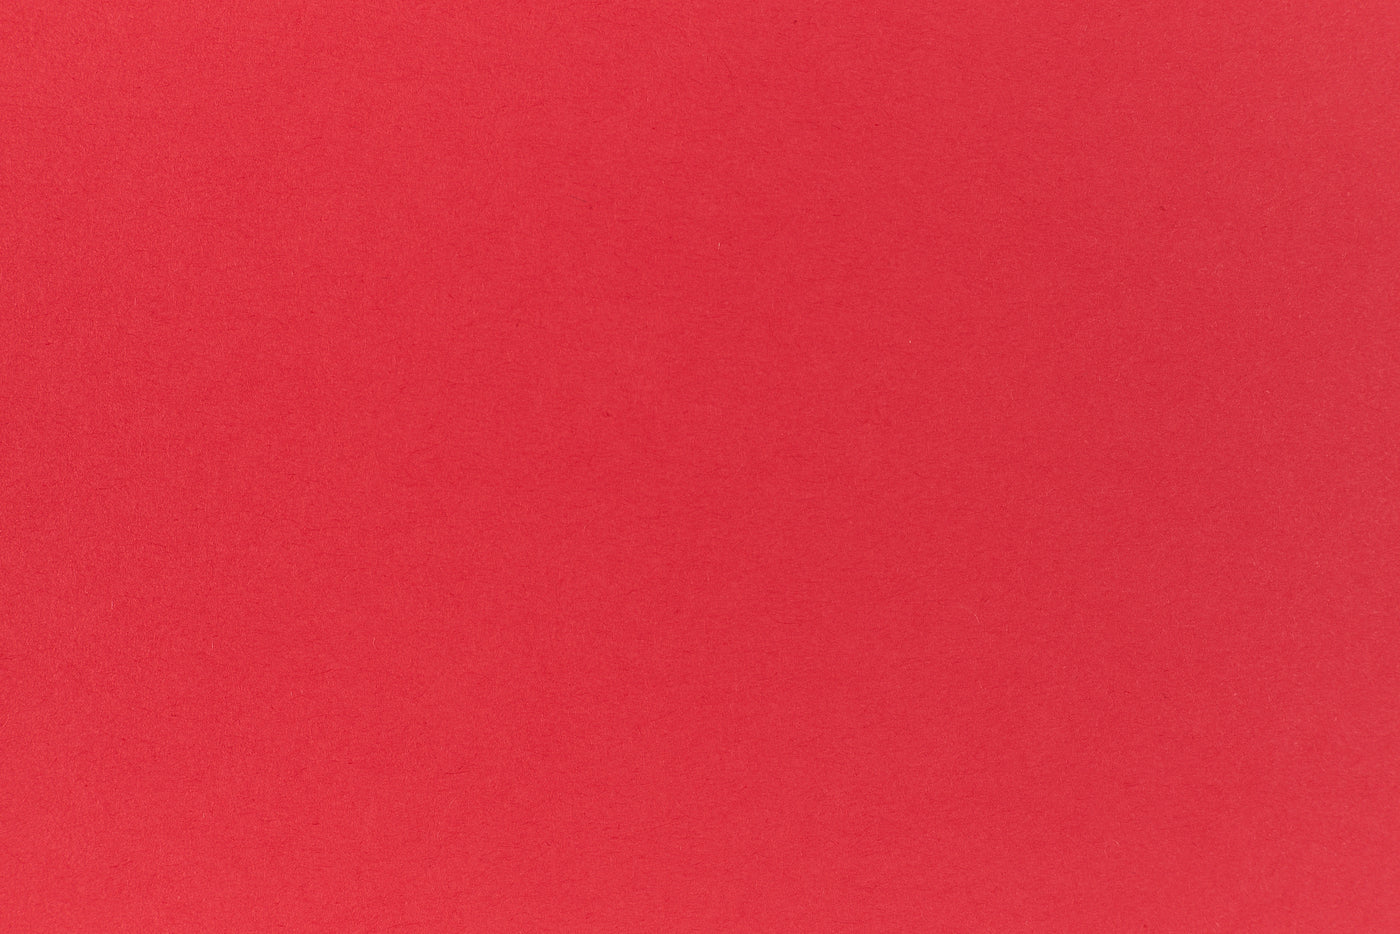 Bright red cardstock paper.